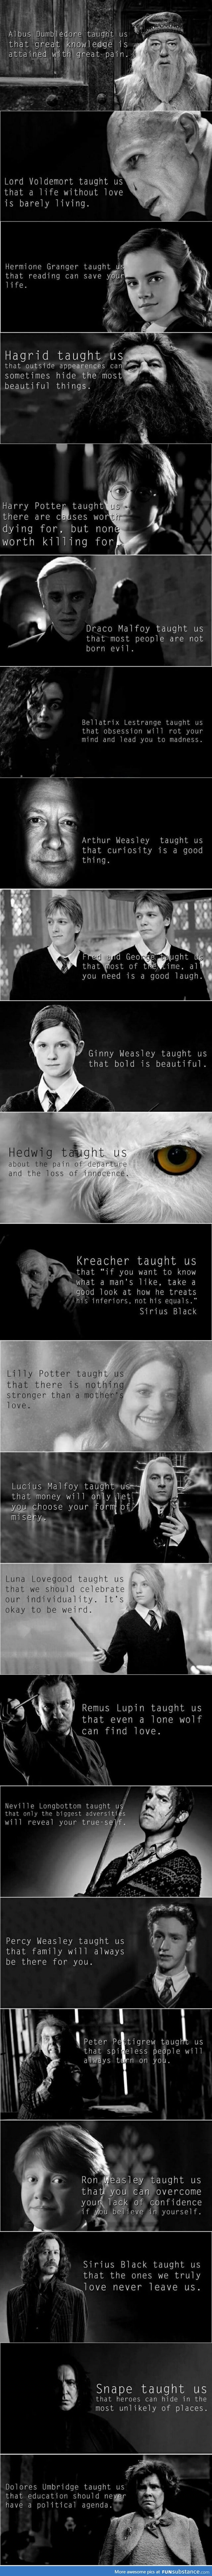 What the Harry Potter books thought us..